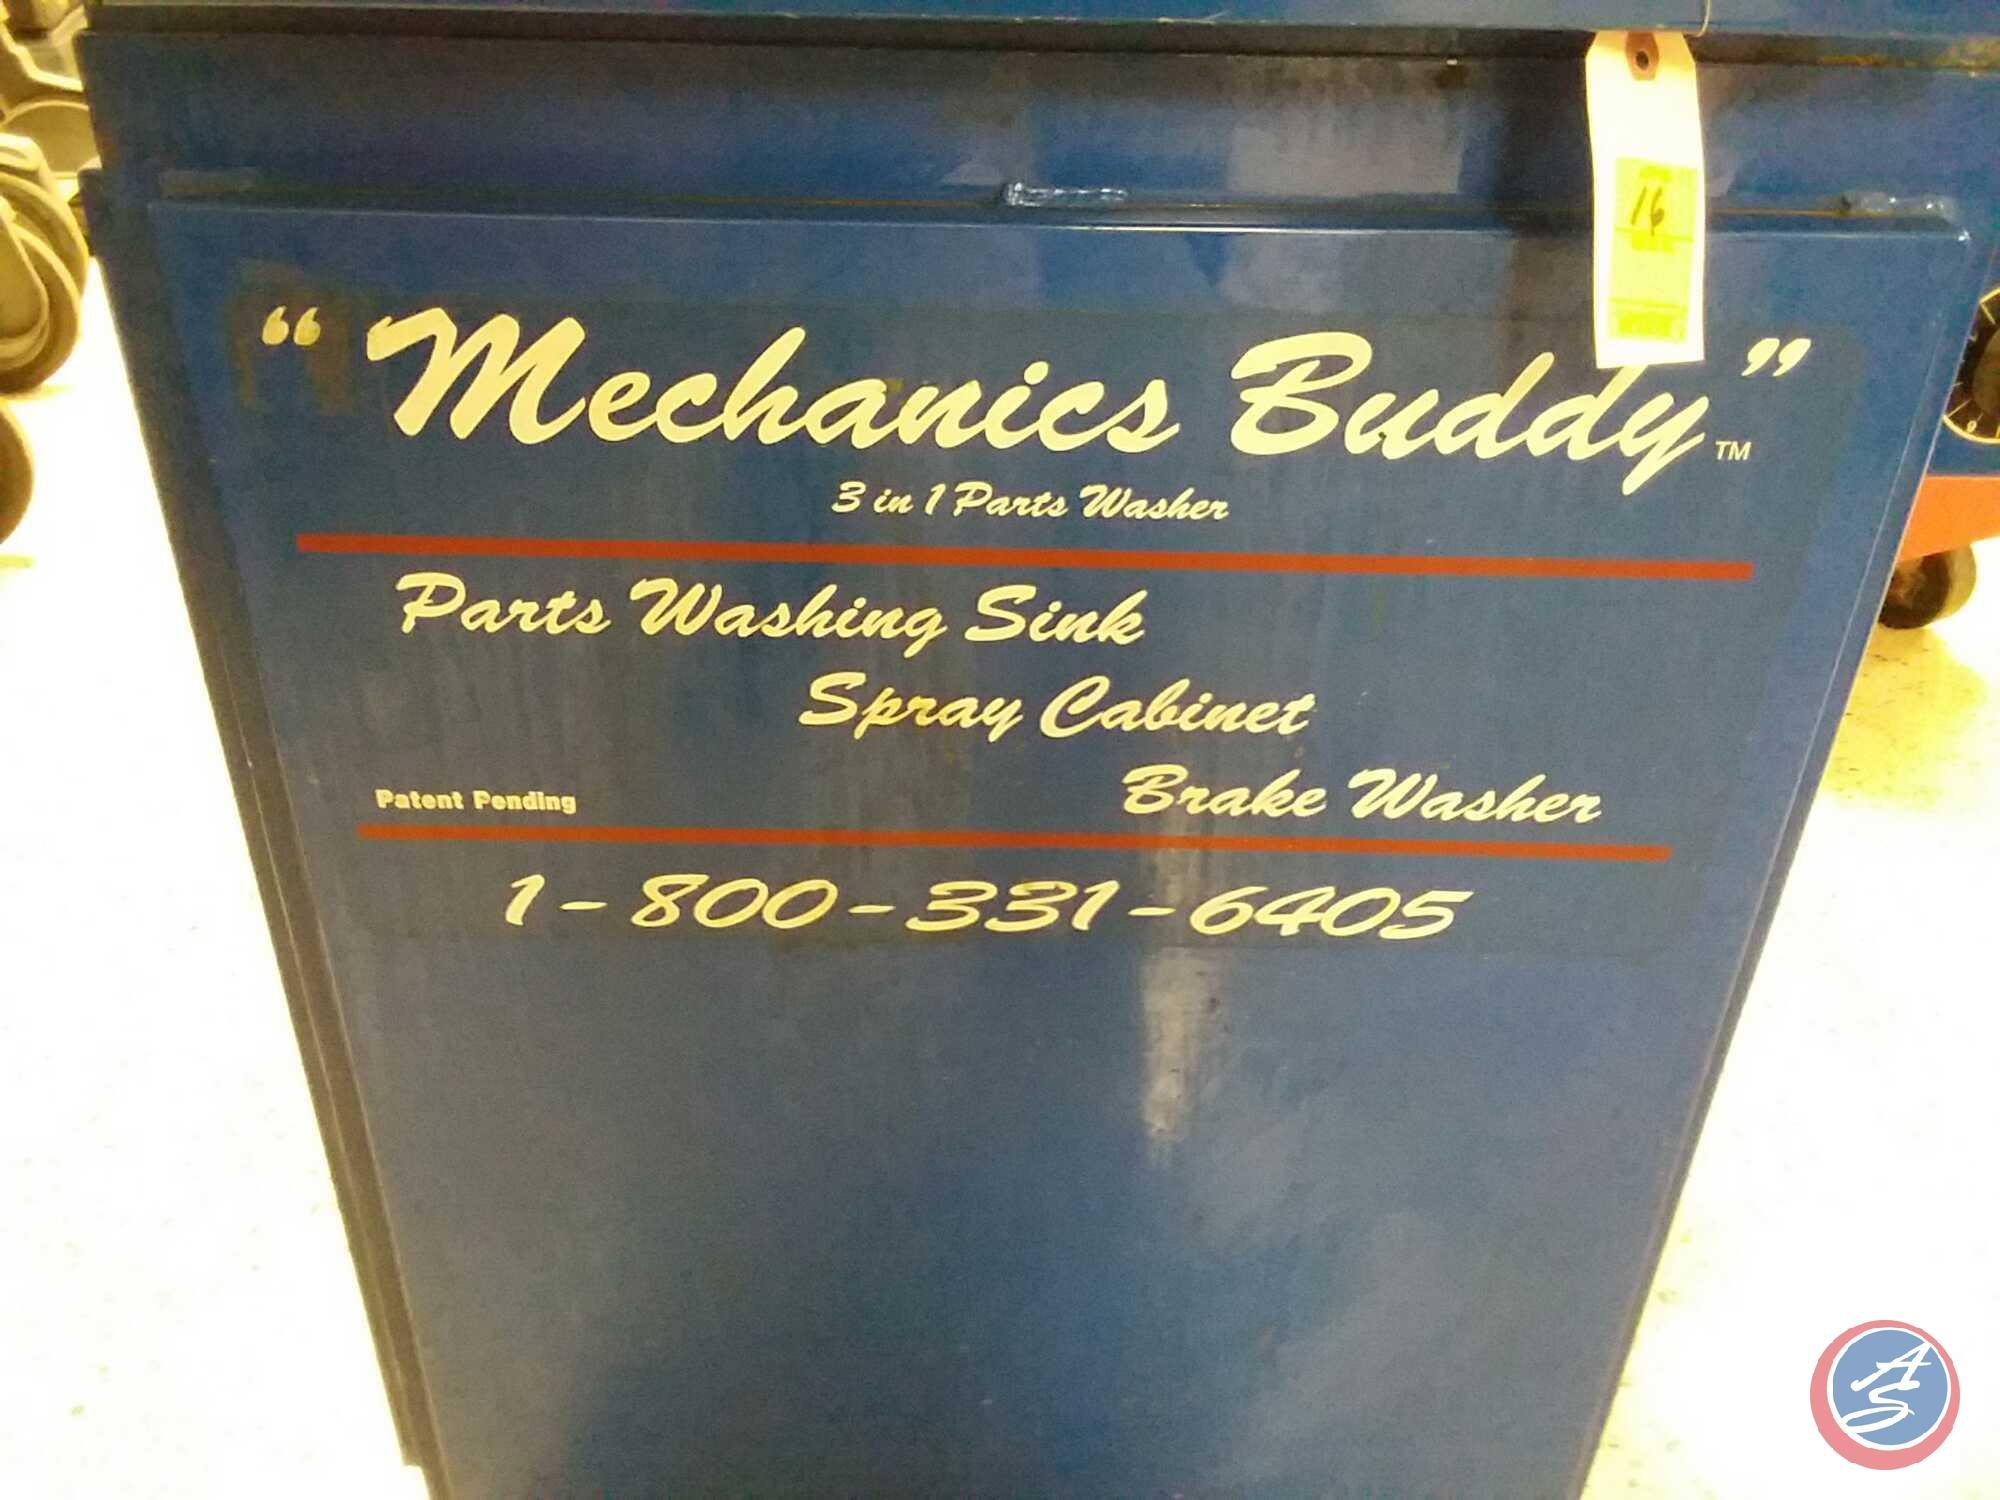 Mechanics Buddy 3 in 1 110V Portable MB-5 Parts Washer - Parts Washing Sink, Spray Cabinet and